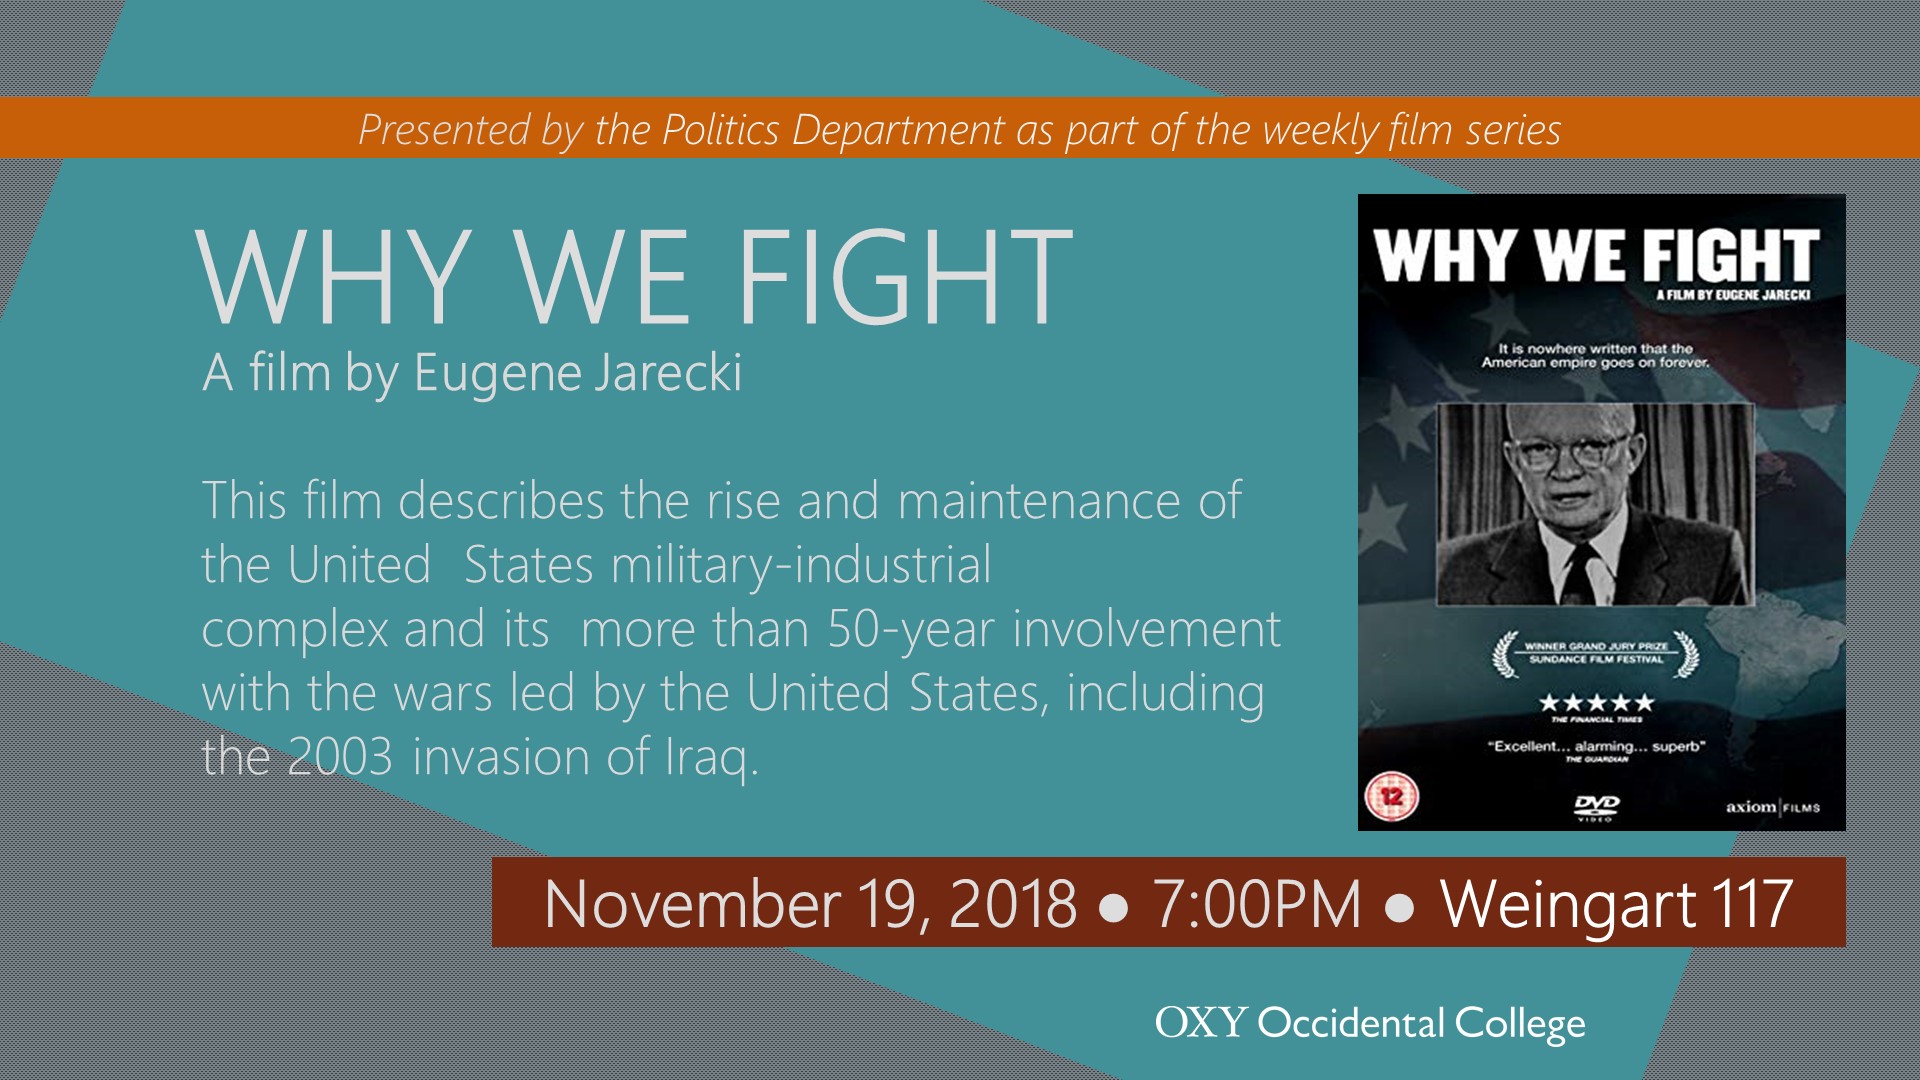 Image for "Why We Fight" A film by Eugene Jarecki Event